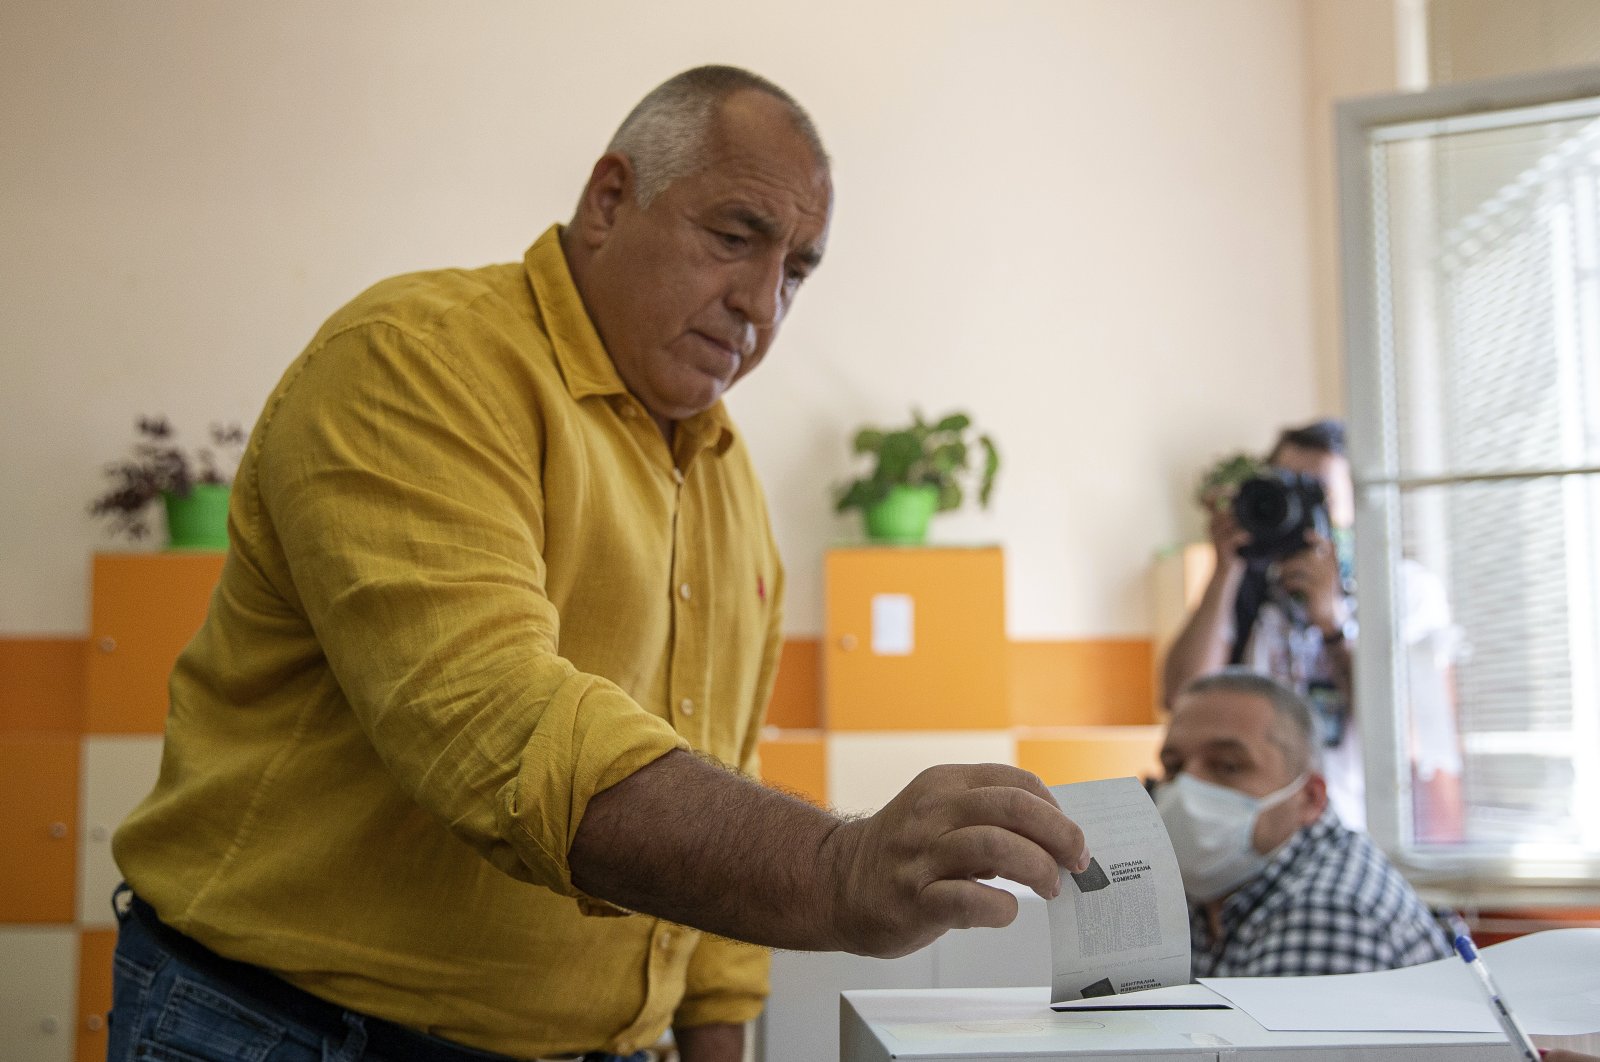 Bulgarian former prime minister Boyko Borissov casts his vote during parliamentary elections in the town of Bankya near capital Sofia, Bulgaria on Sunday, July 11, 2021. (AP Photo)